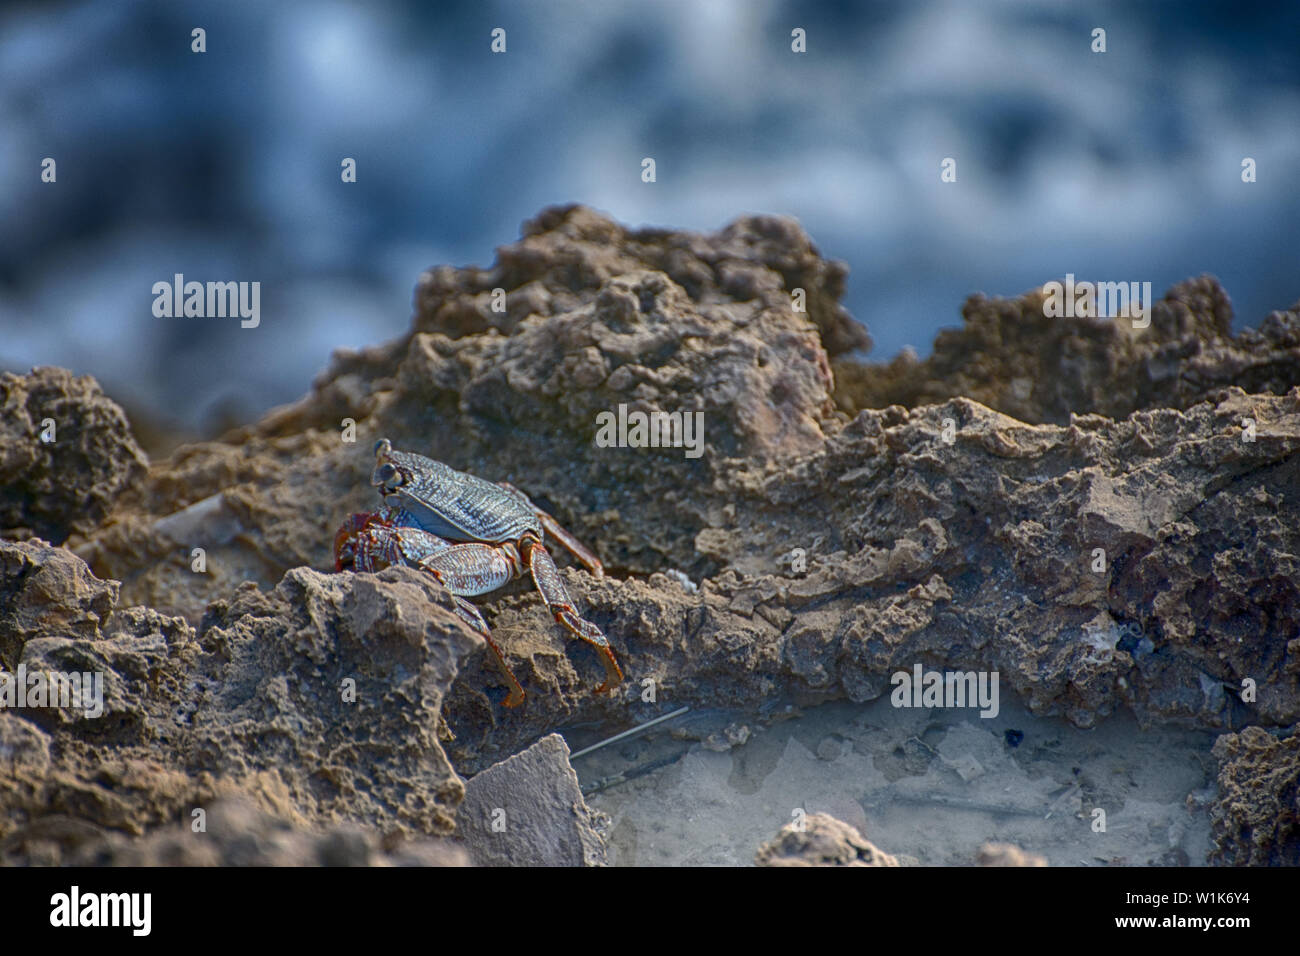 The rocky shores of the Maho Bay Resort in Sint Maarten were teeming with wildlife, like this little crab. Stock Photo